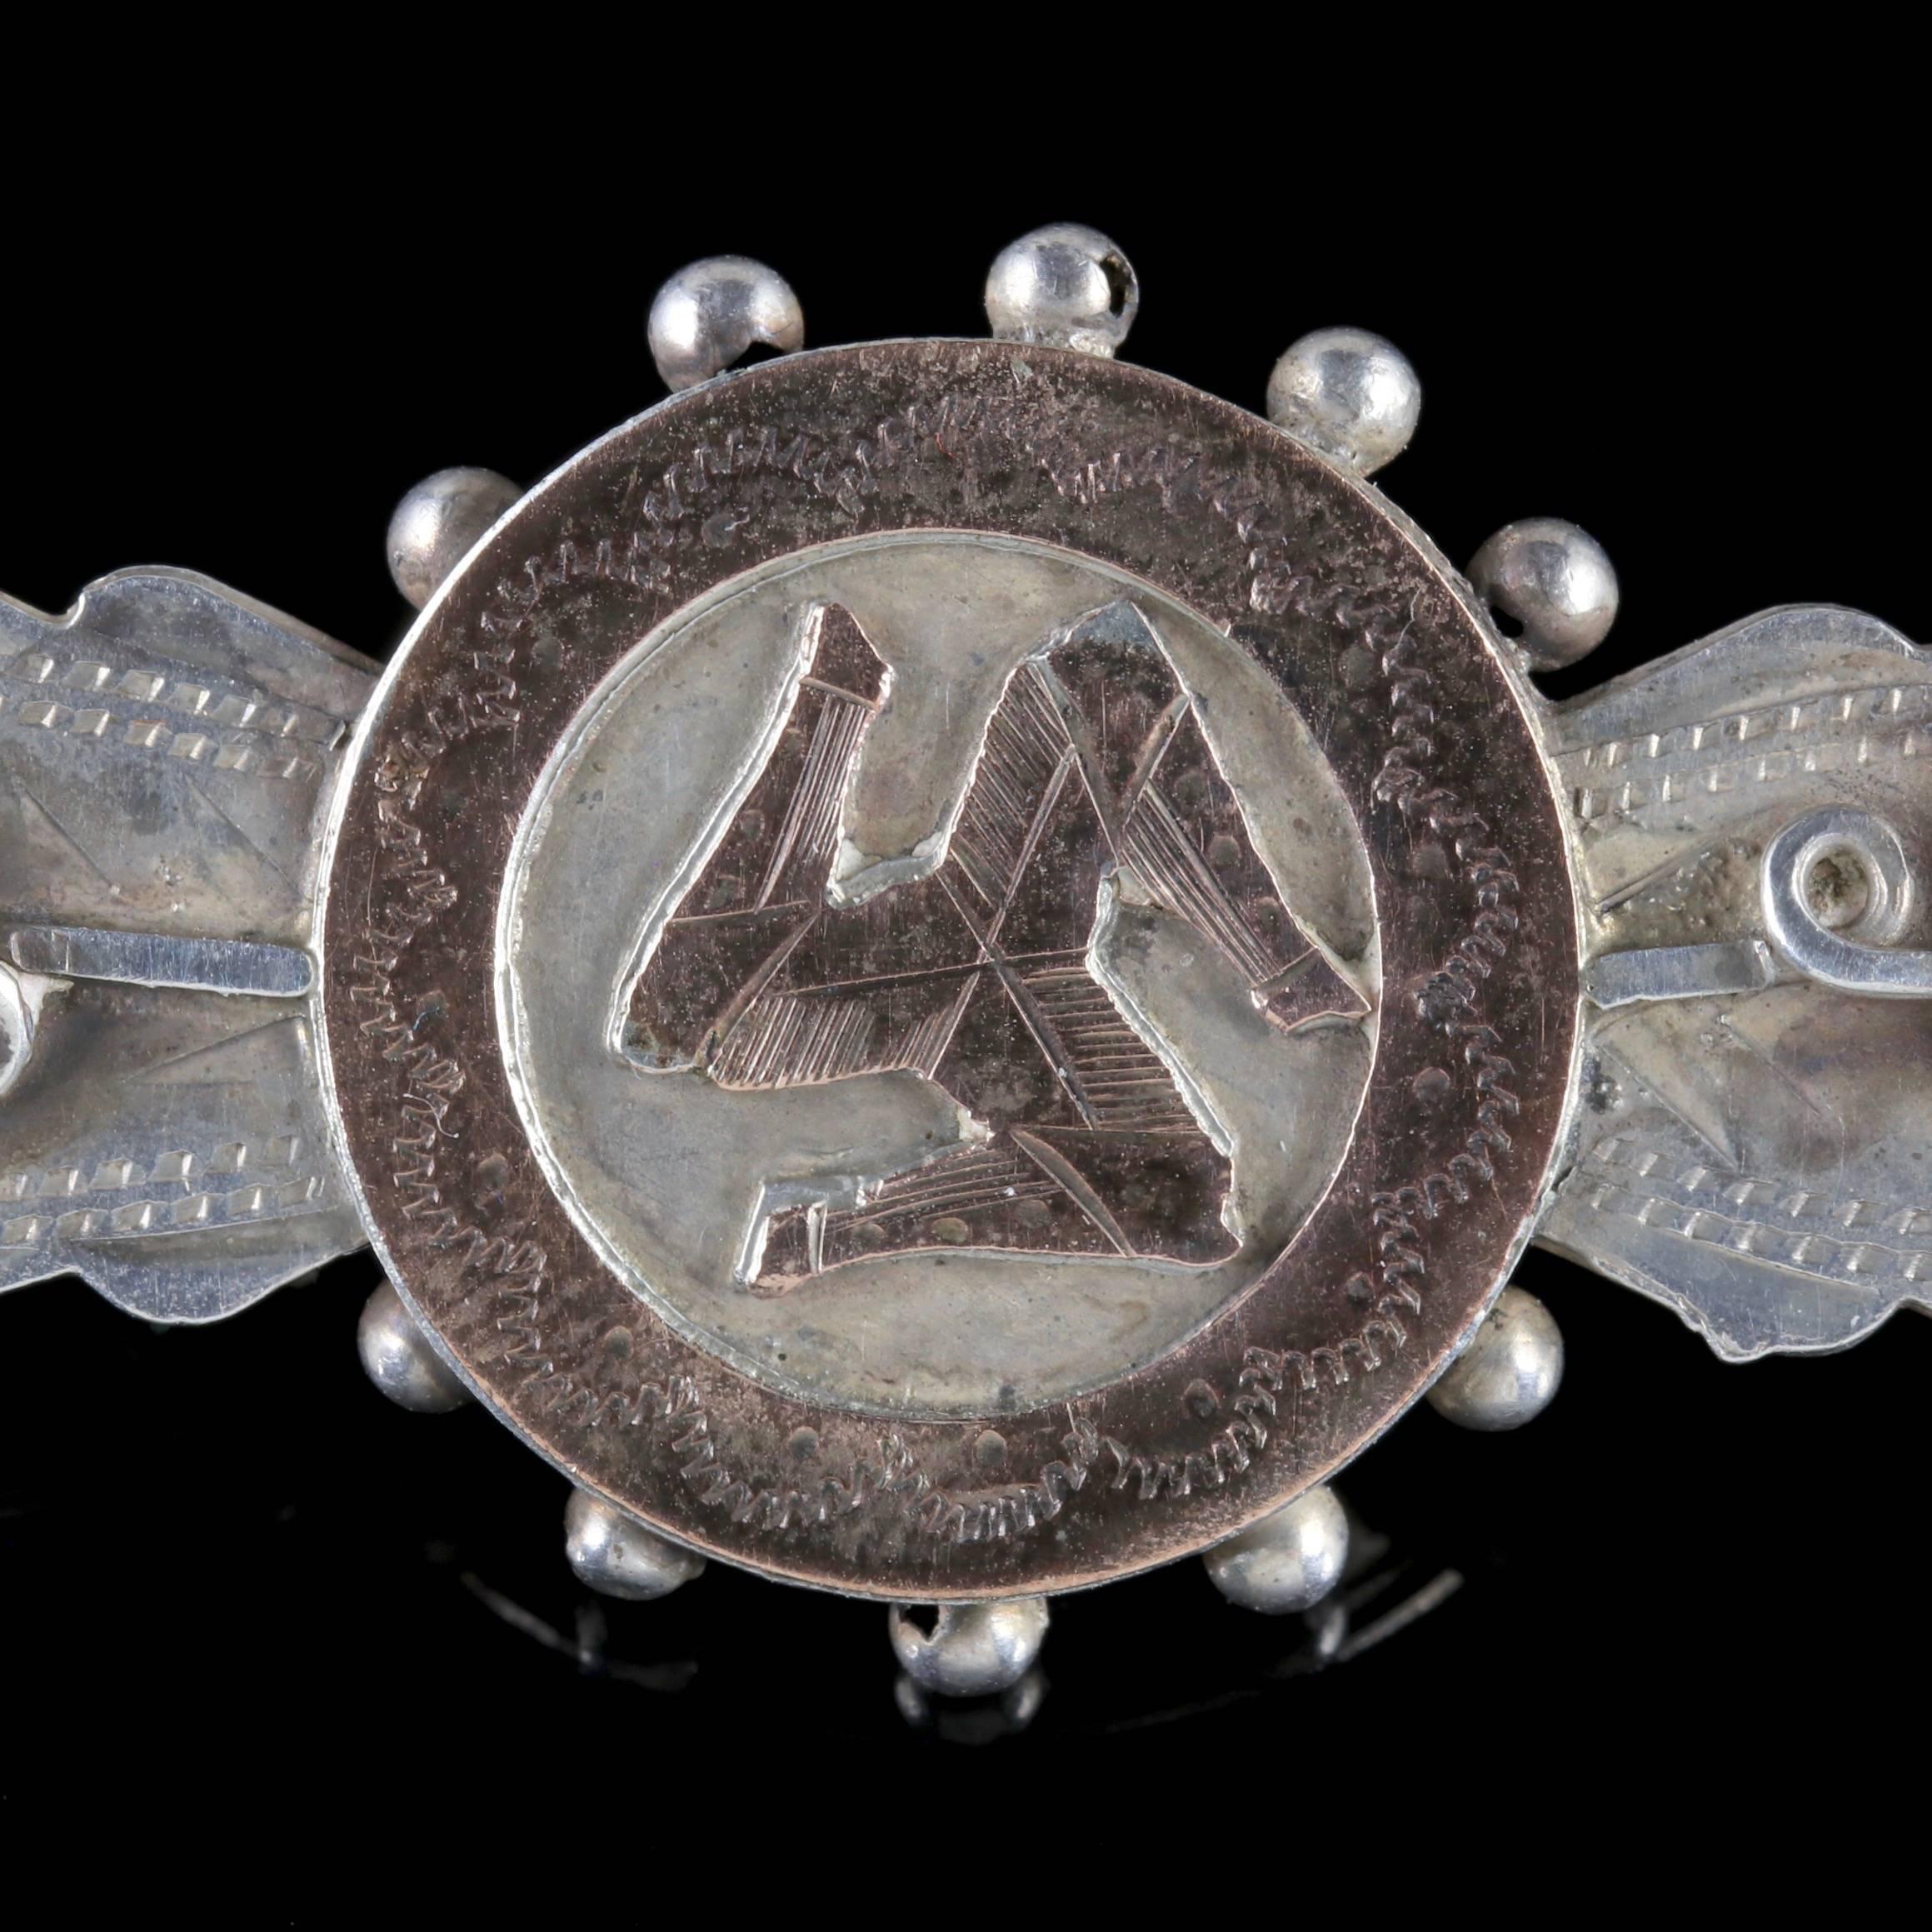 This beautiful antique Sterling Silver brooch is Victorian dated Birmingham 1900. 

The brooch displays beautiful engraved workmanship with flowers at either side and a golden Triskelion in the centre.

The Triskelion is an ancient symbol made up of